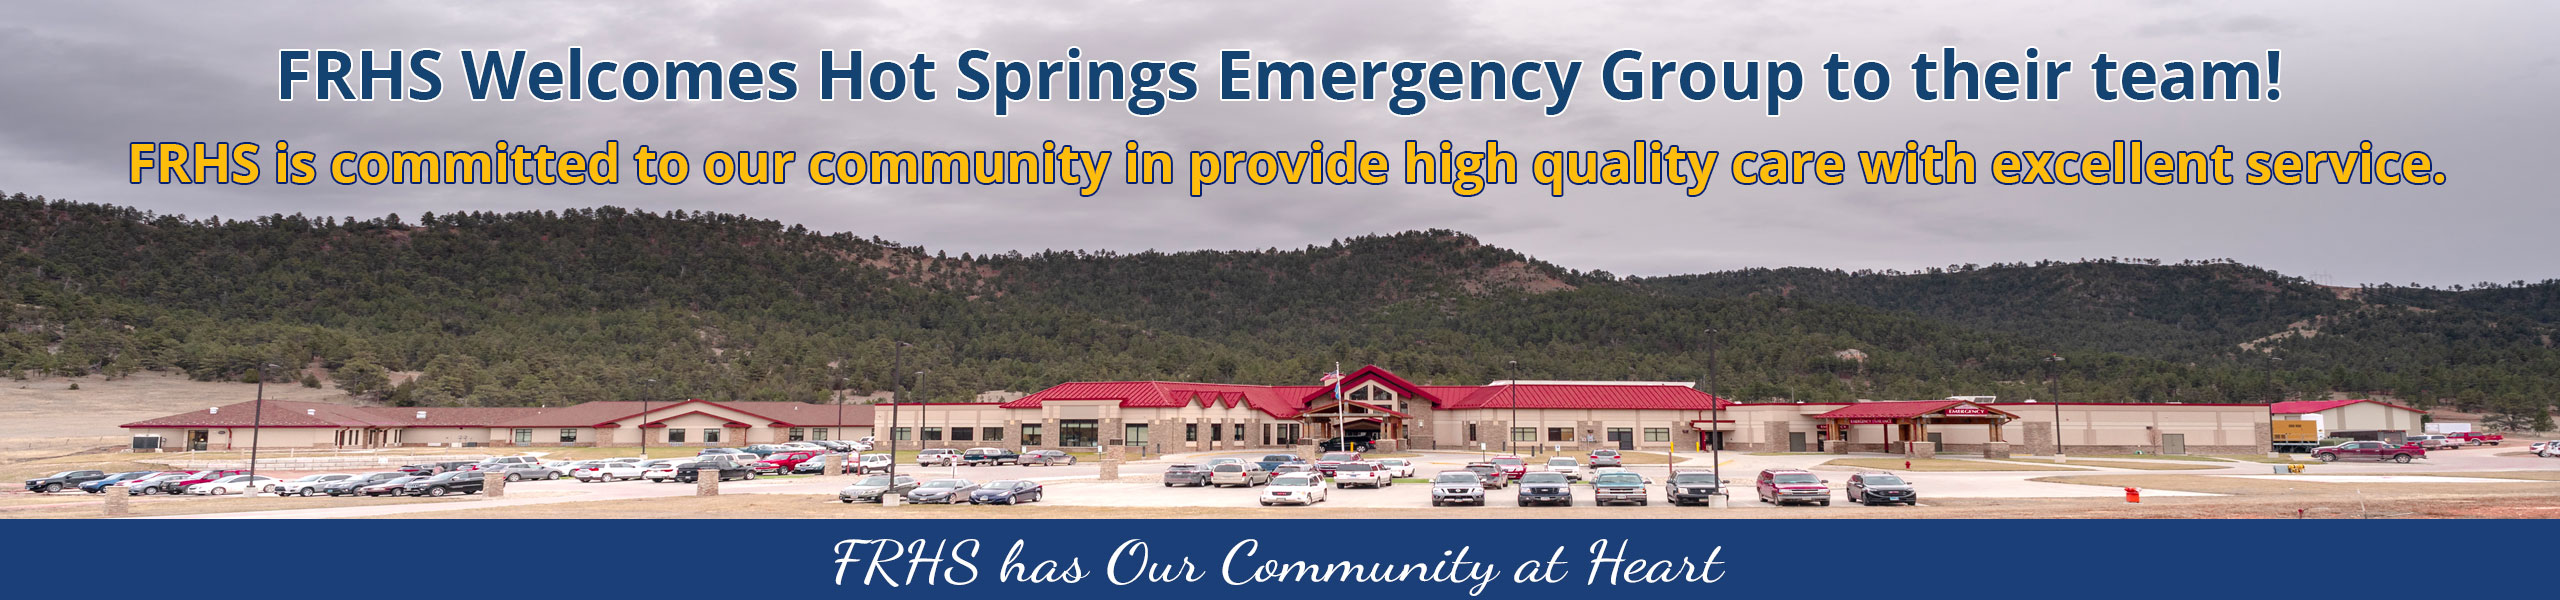 Picture of The Fall River Health Services

Banner says:
FRHS Welcomes Hot Springs Emergency Group to their team!

FRHS is committed to our community in provide high quality care with excellent service

FRHS has Our Community at Heart